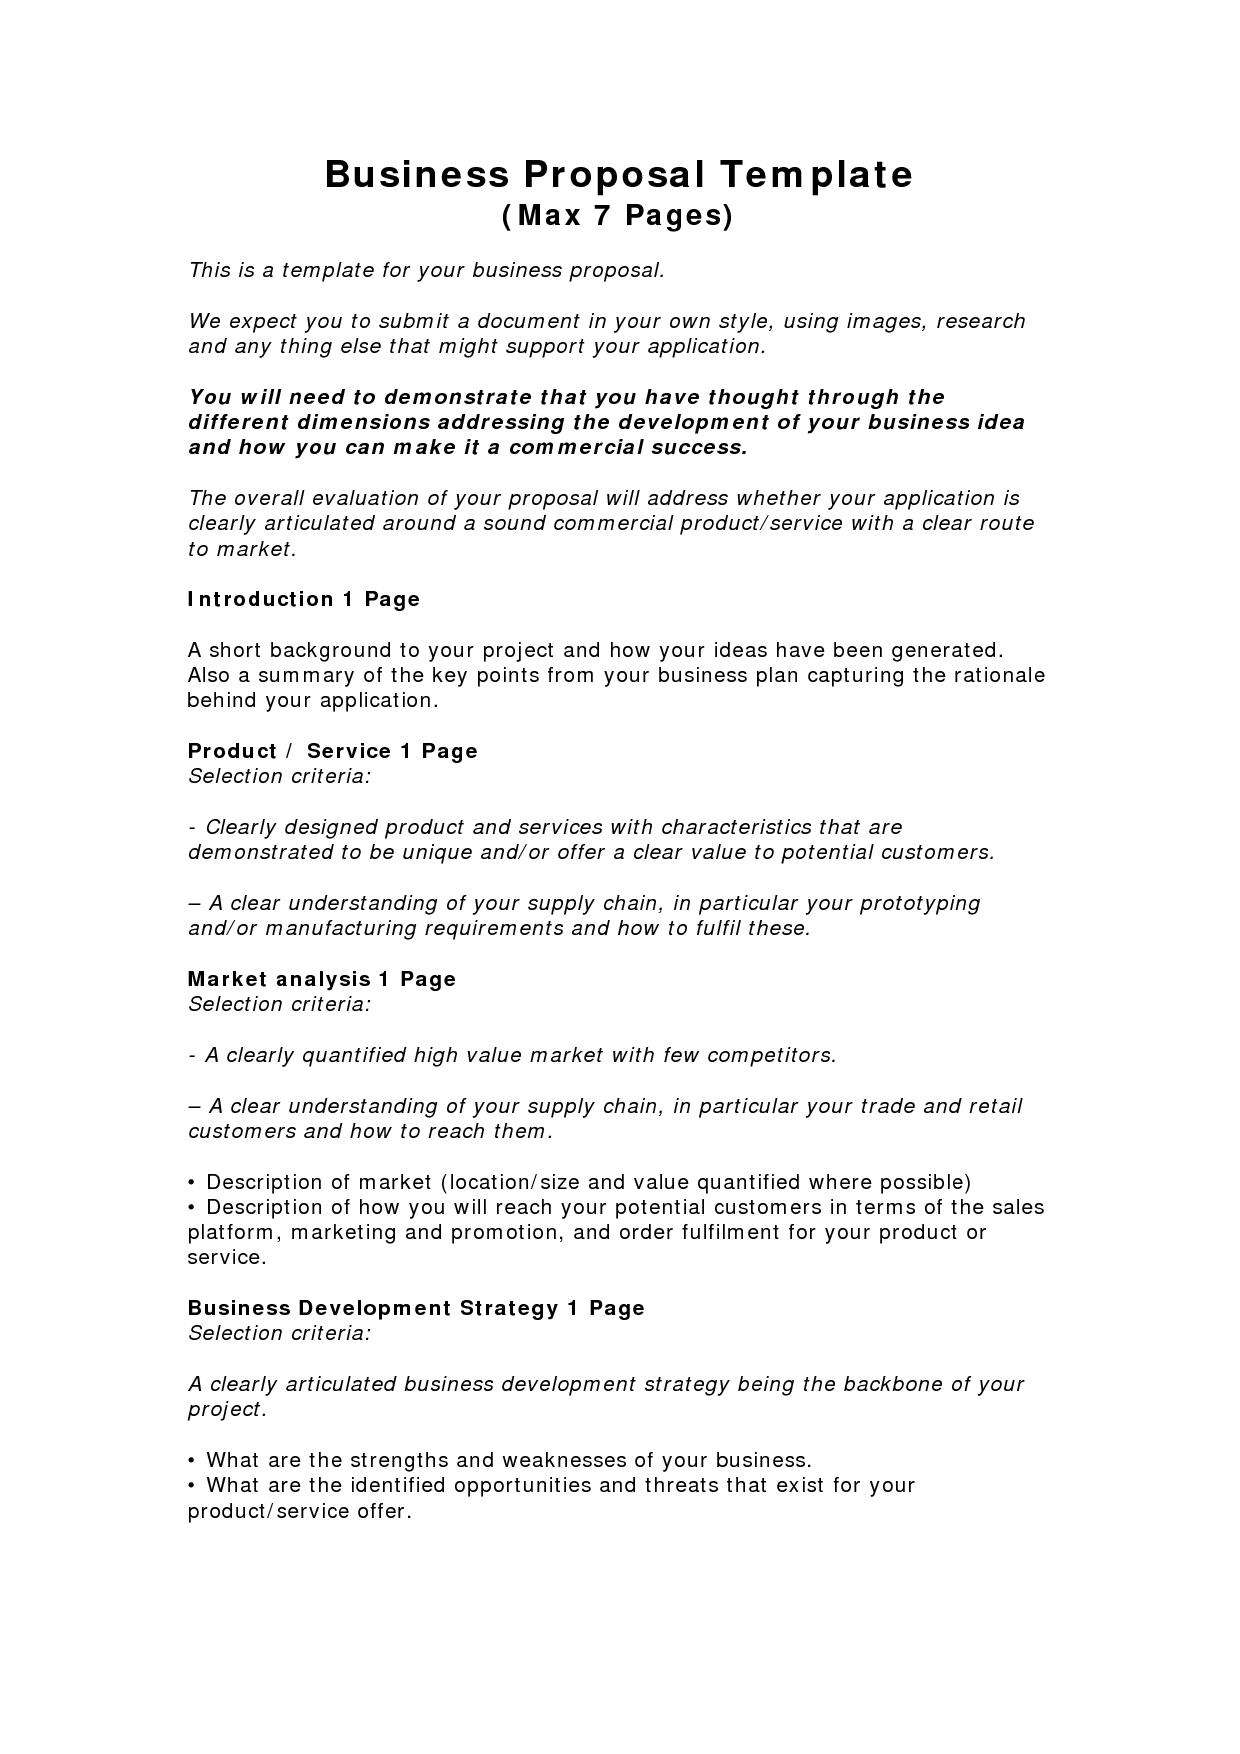 Business Proposal Templates Examples | Business Proposal For Free Business Proposal Template Ms Word